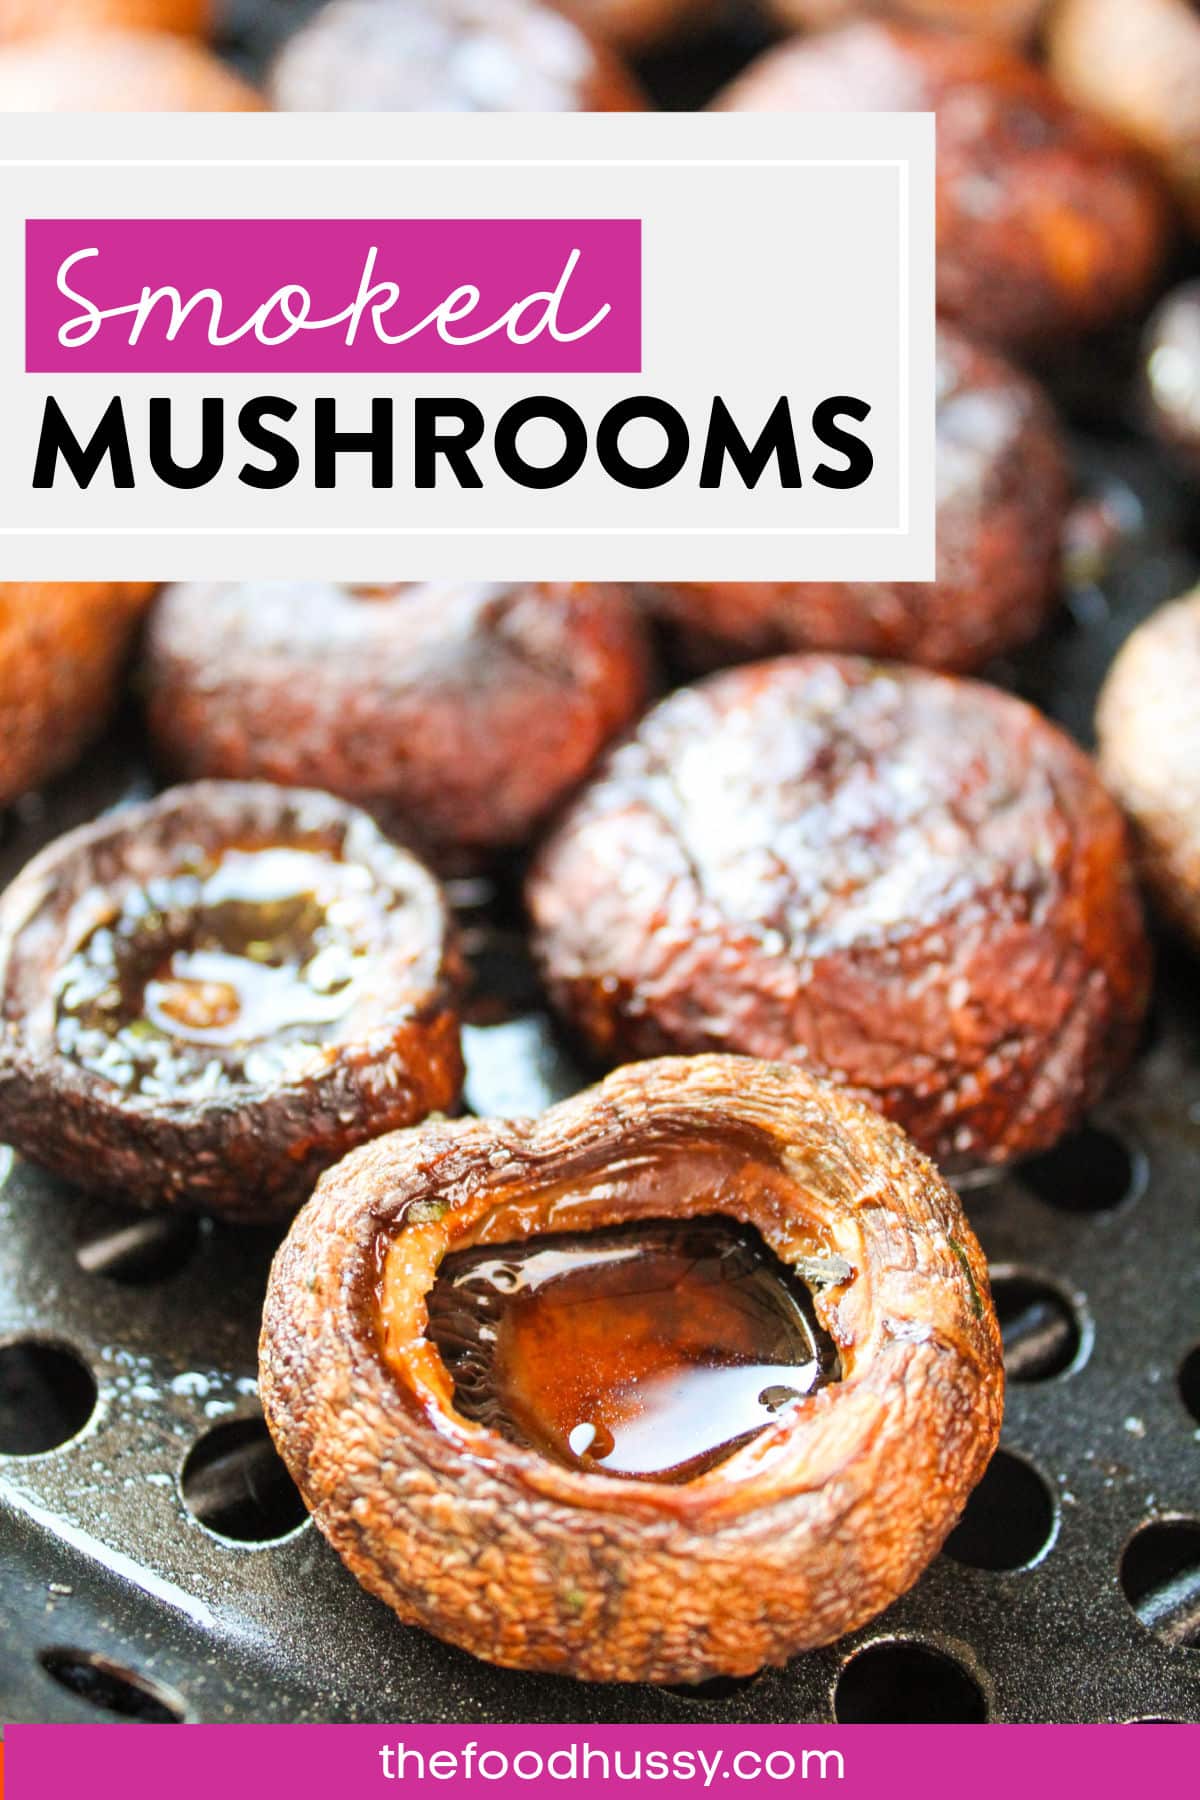 Smoked Mushrooms are so delicious - they absorb the smokiness from the Traeger wood pellets but they still have the meatiness that we love about mushrooms! The earthy mushrooms pair so well with that smoky flavor. Great as a side dish or appetizer!
 via @foodhussy